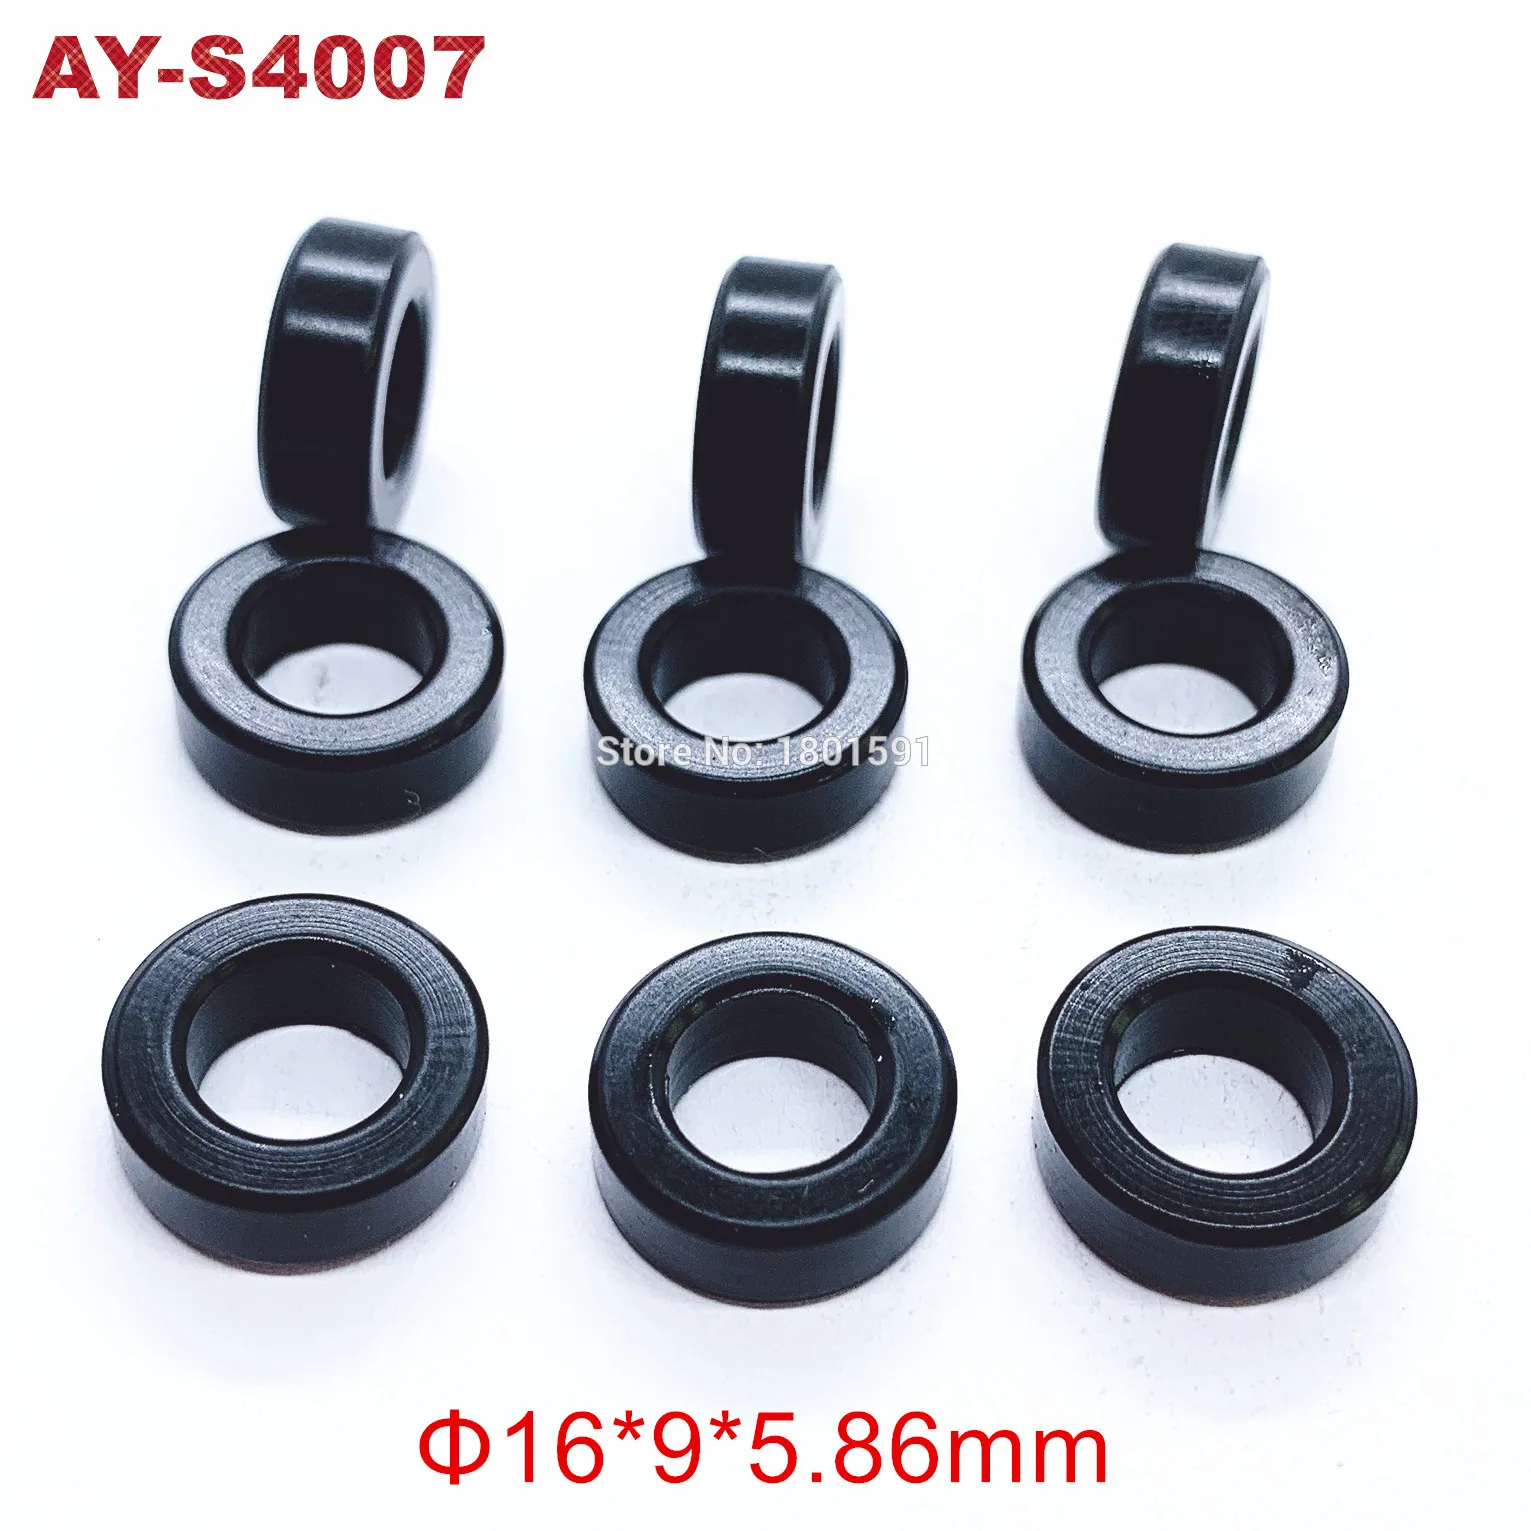 200pieces corrugated rubber seals oring 16*9*5.8mm for toyota fuel injector repair kits (AY-S4007)